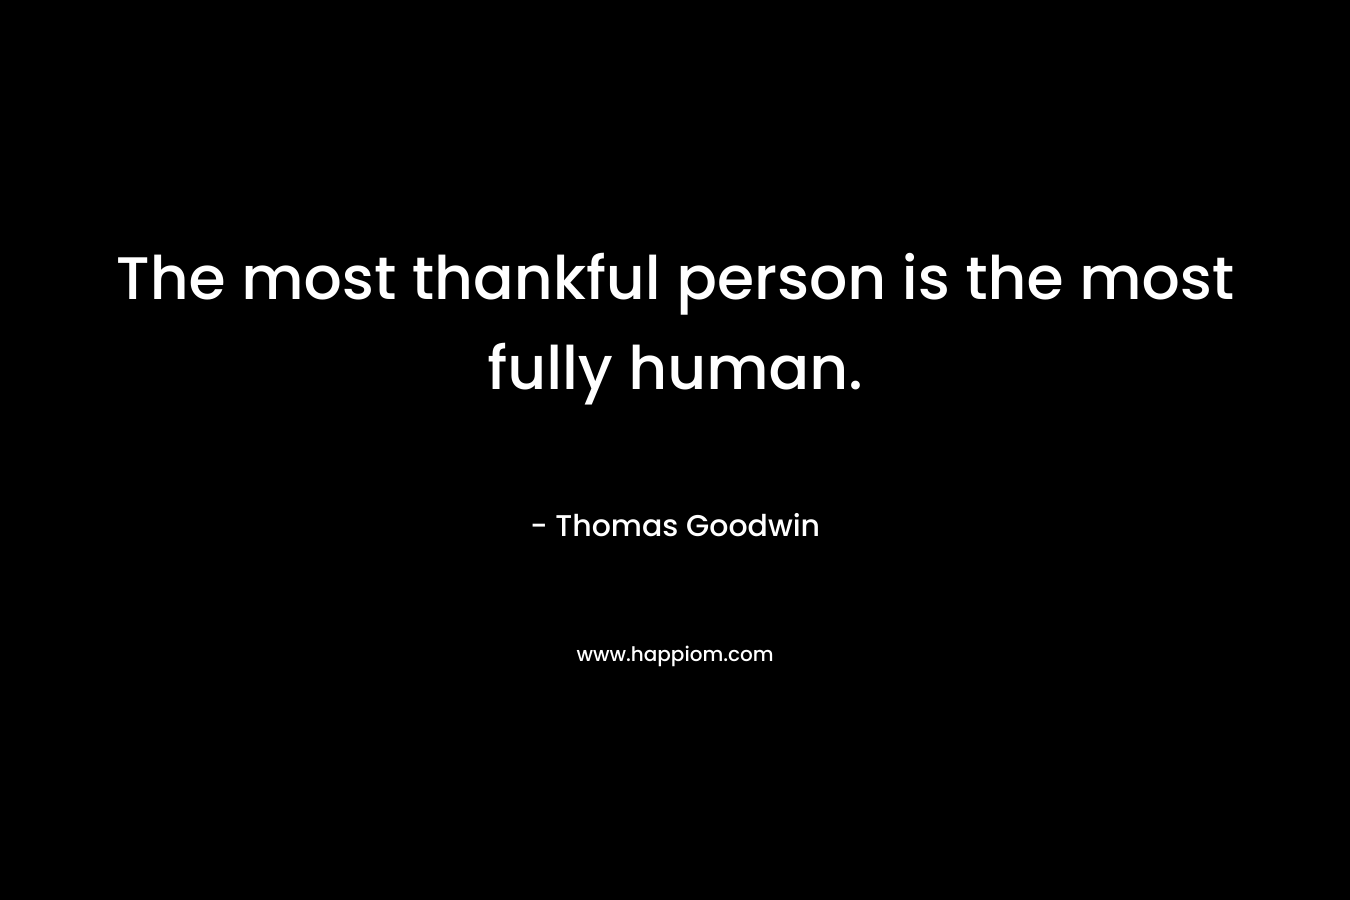 The most thankful person is the most fully human. – Thomas Goodwin